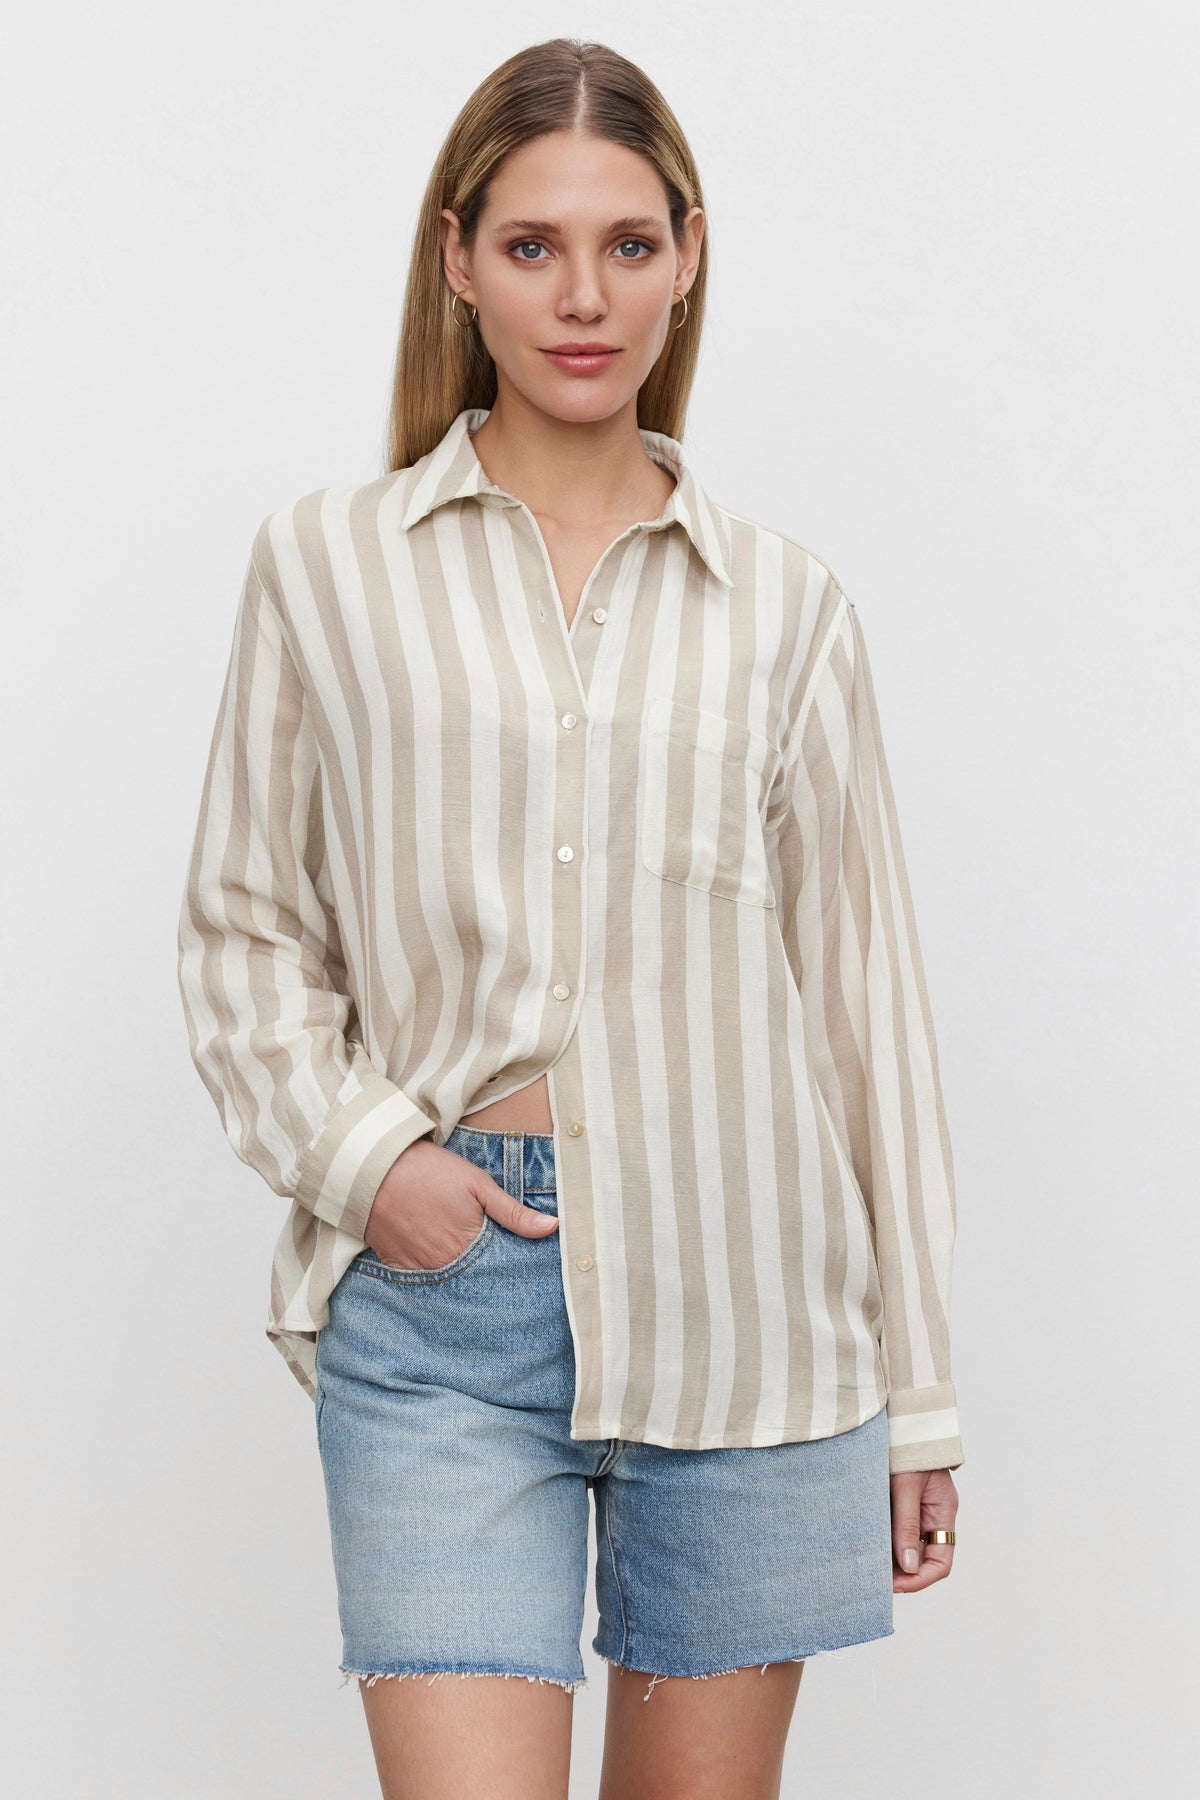 The model is wearing a HARLOW STRIPED LINEN BUTTON-UP SHIRT by Velvet by Graham & Spencer and denim shorts.-36247888101569